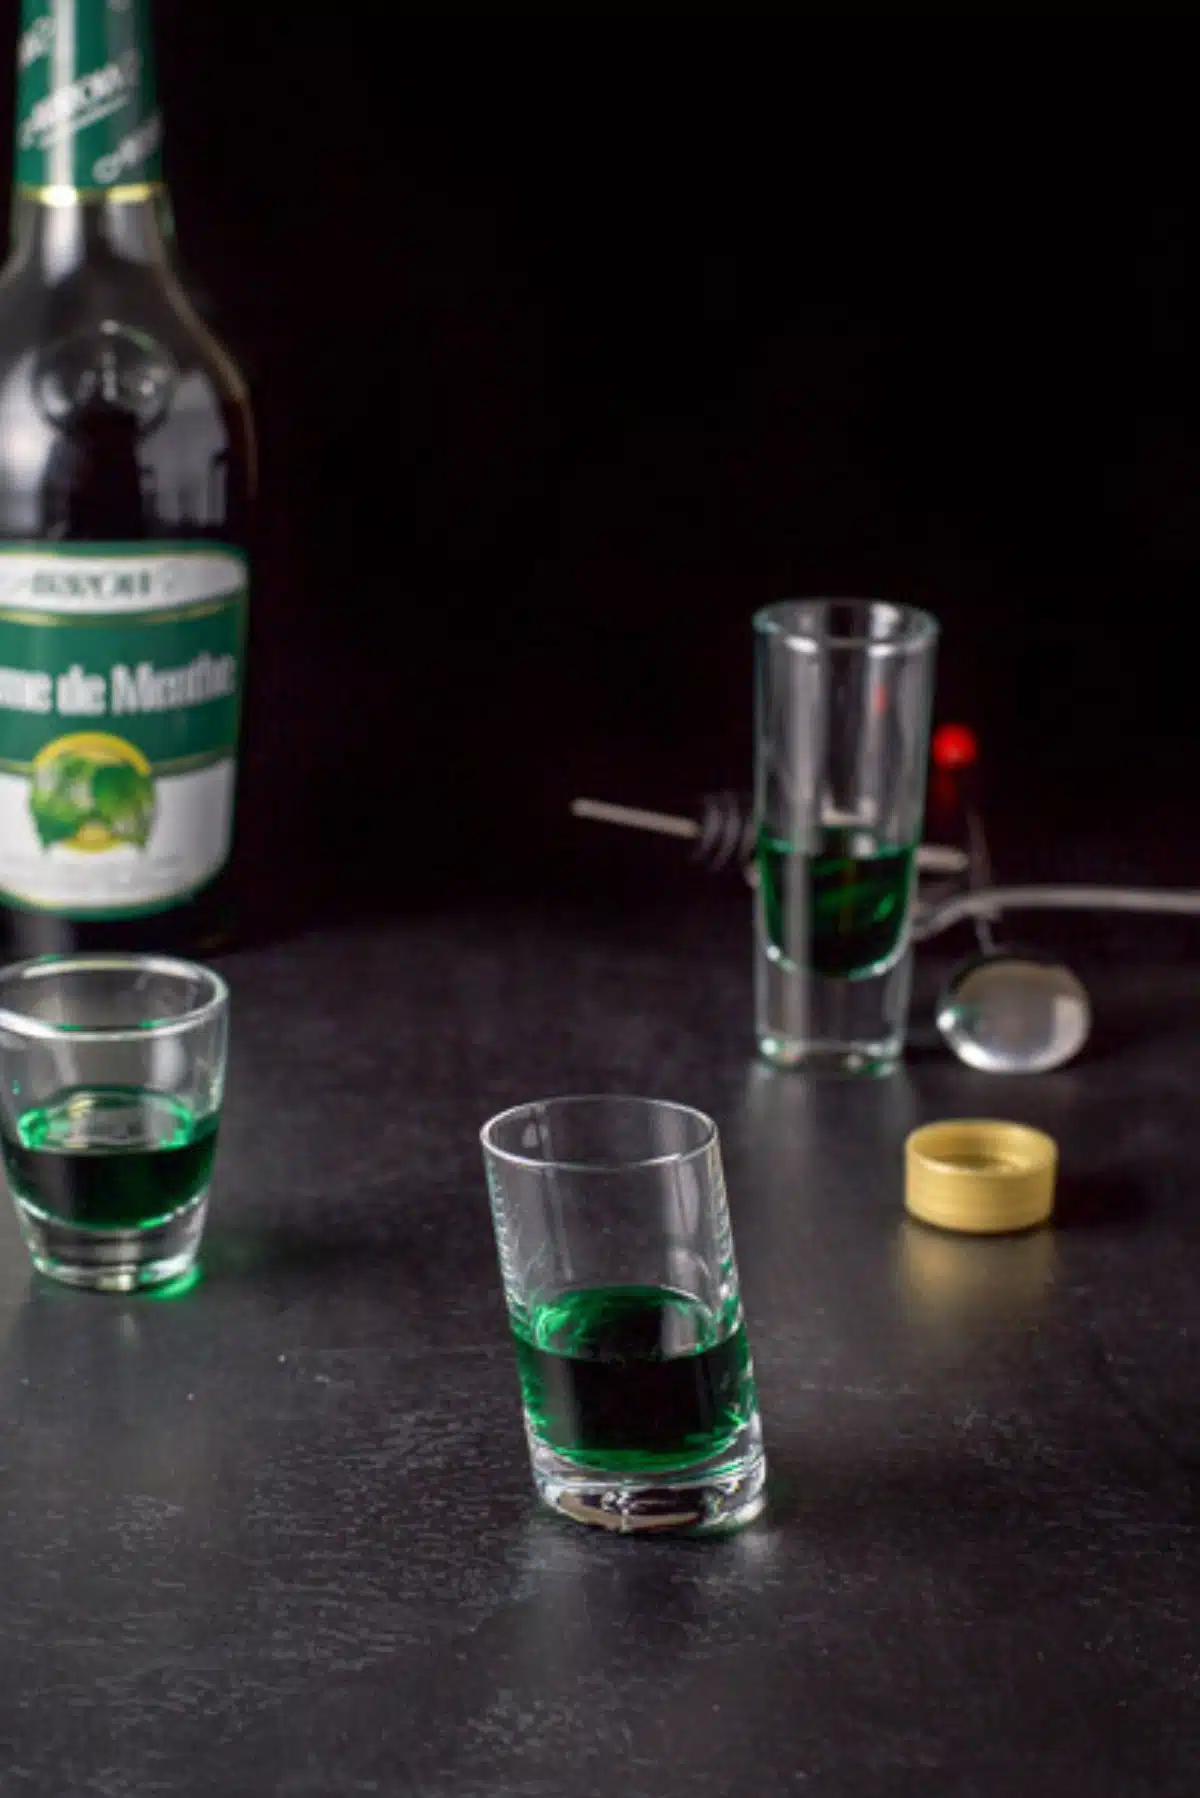 Green creme de menthe poured into the shot glasses with the bottle in the background